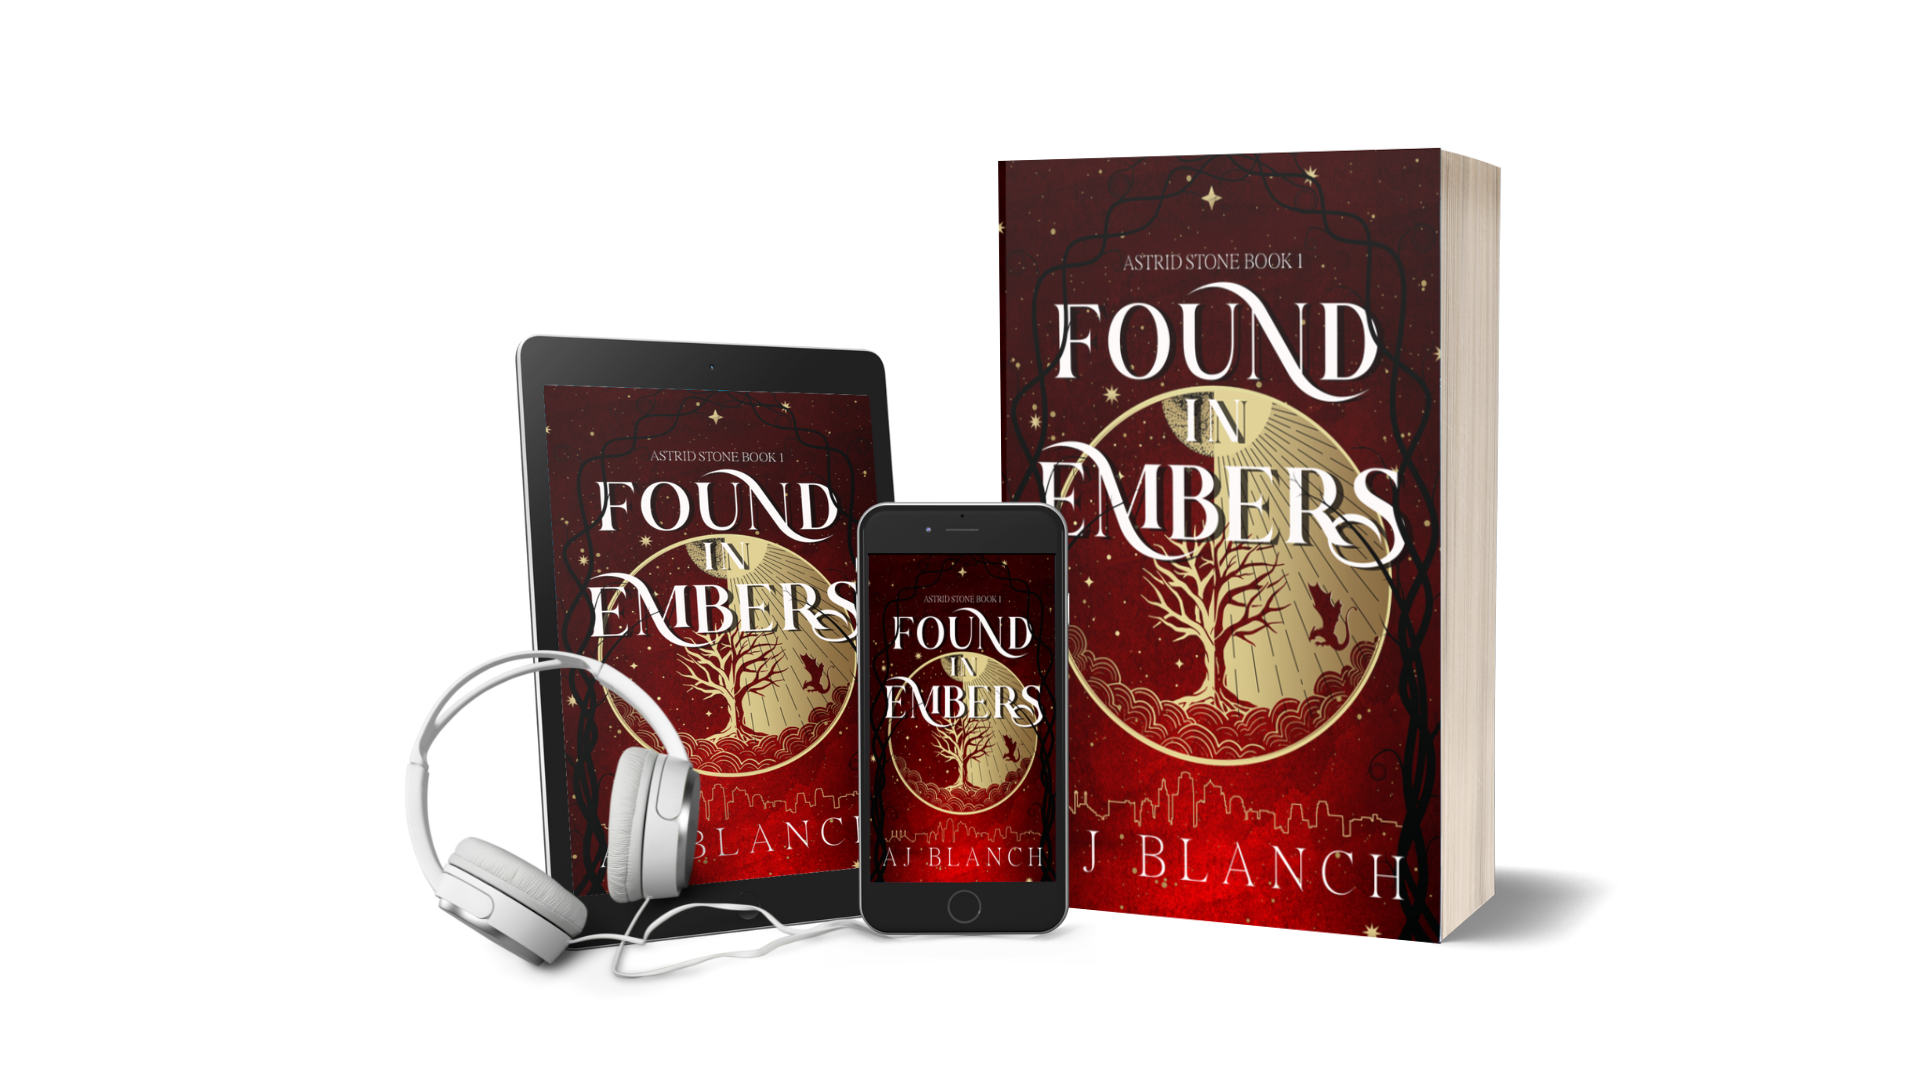 Paperback, ebook, and audiobook of Found in Embers